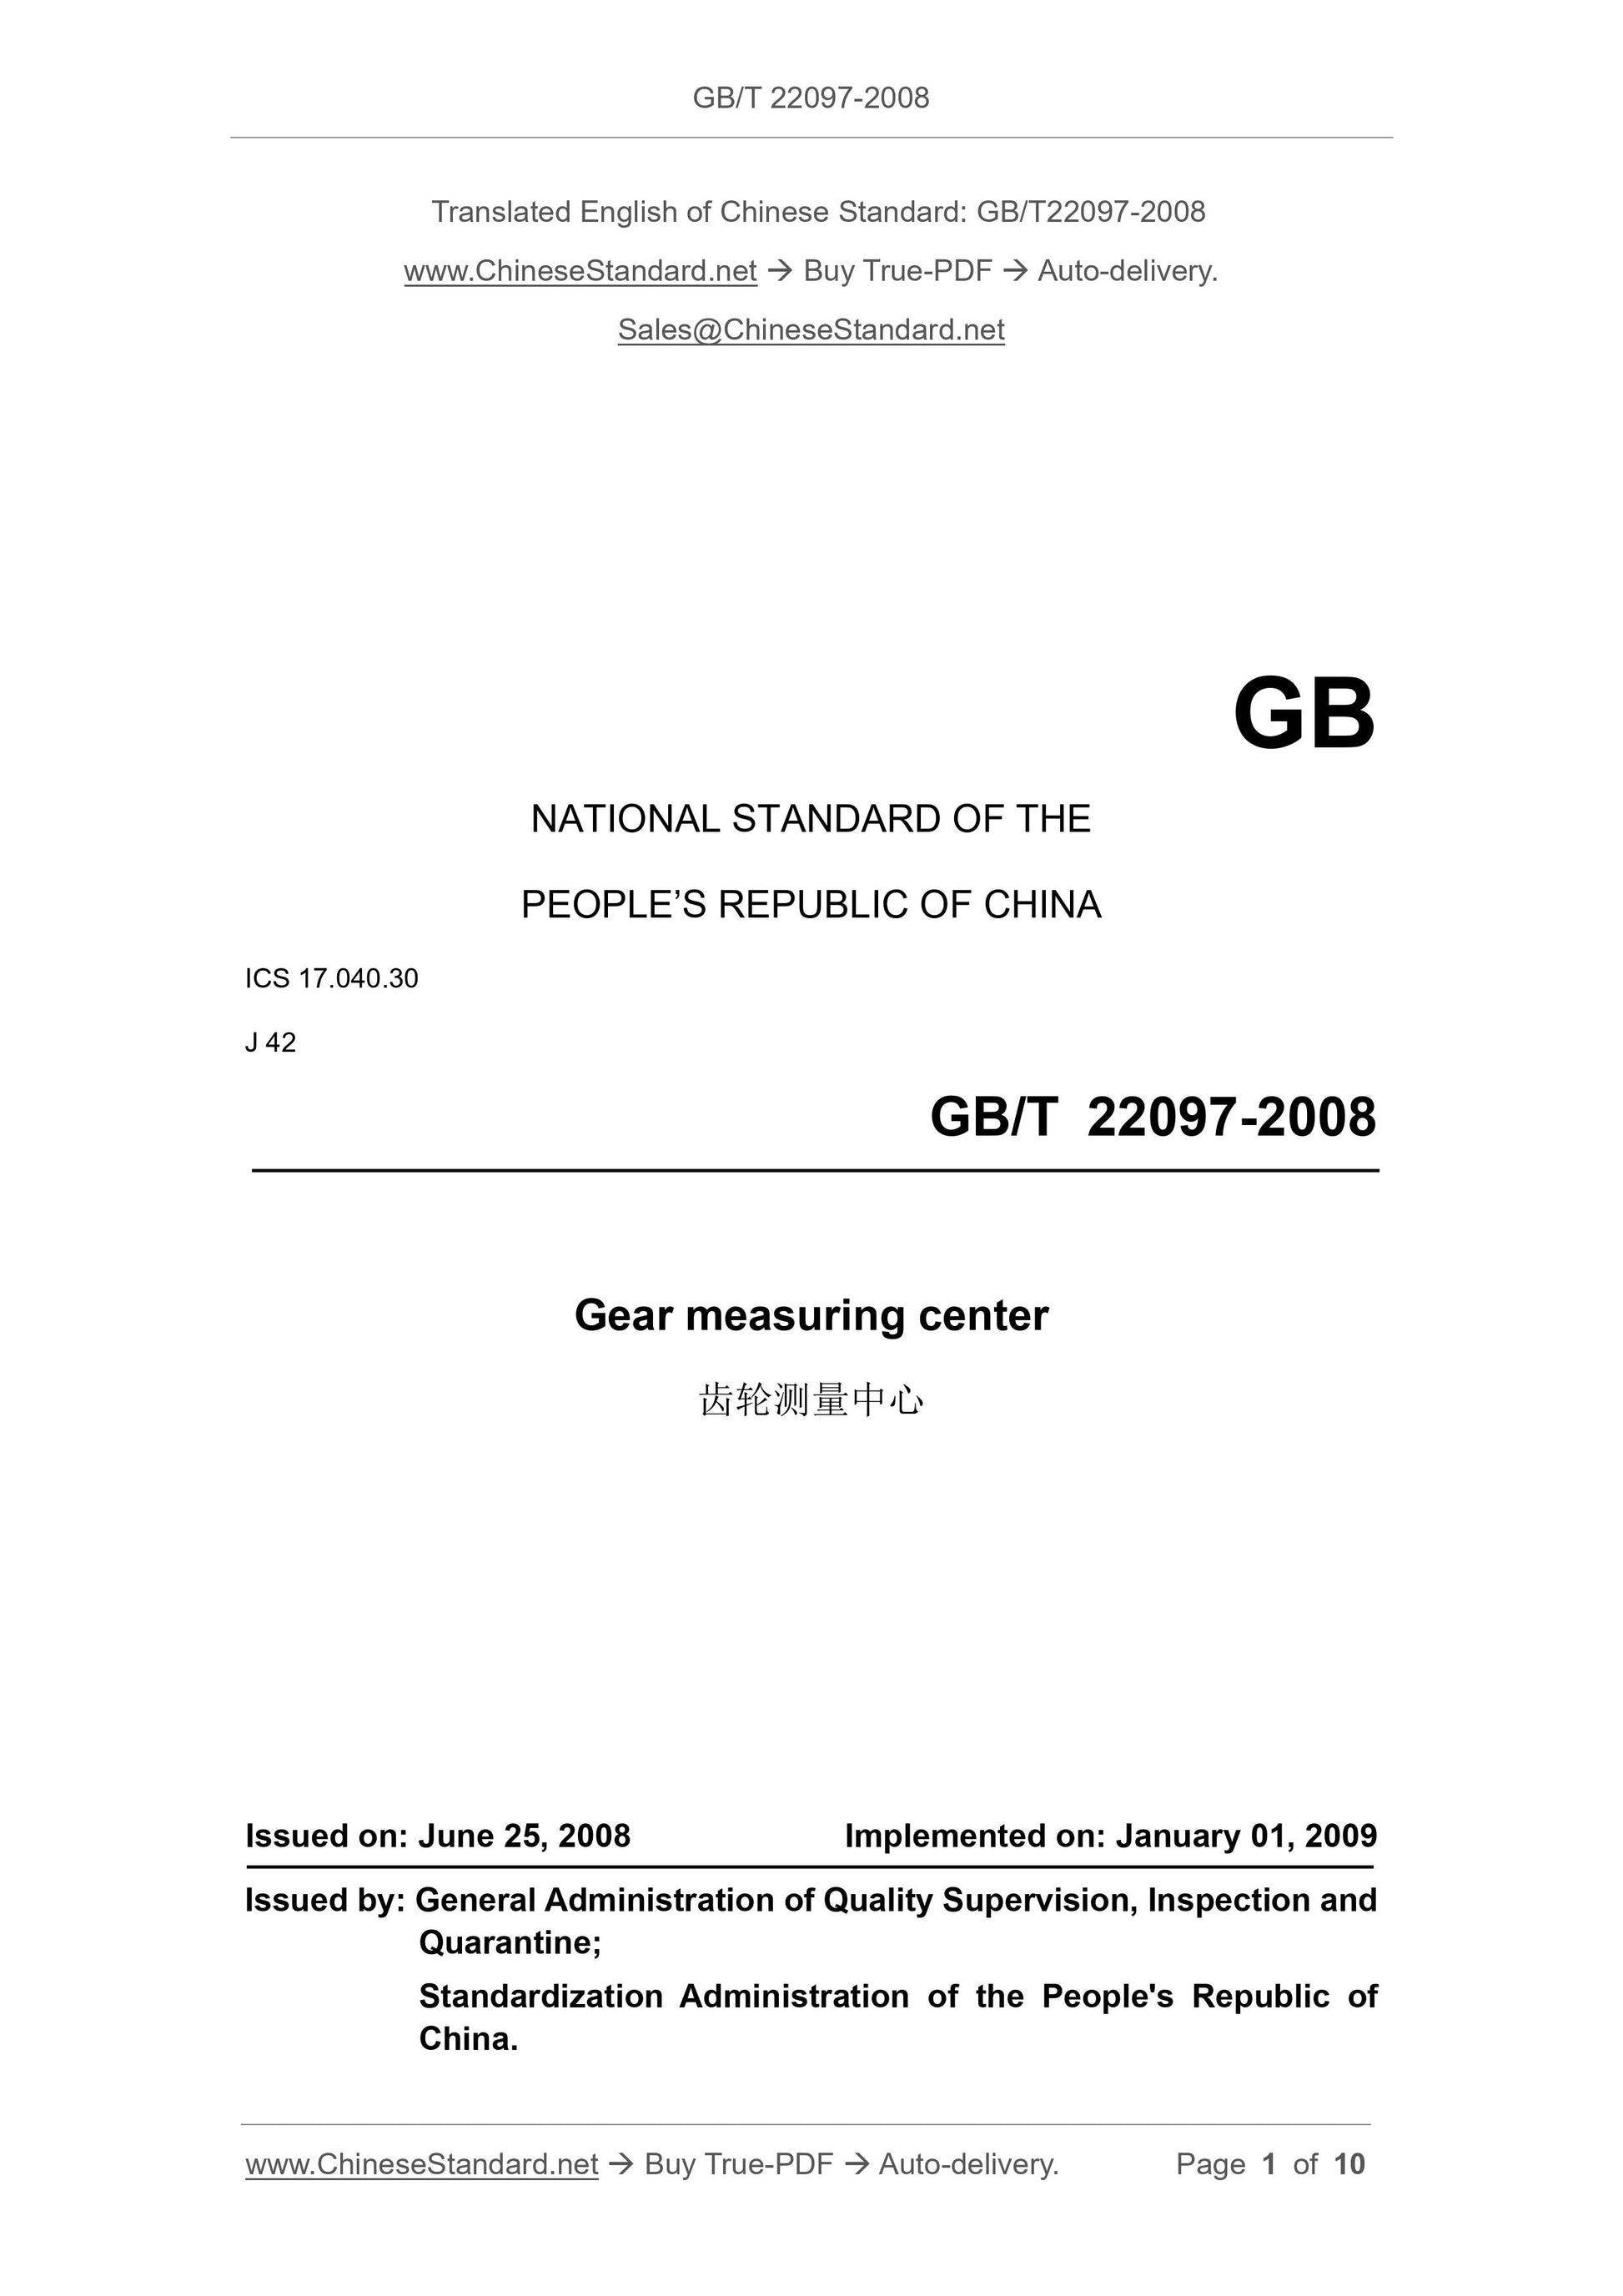 GB/T 22097-2008 Page 1